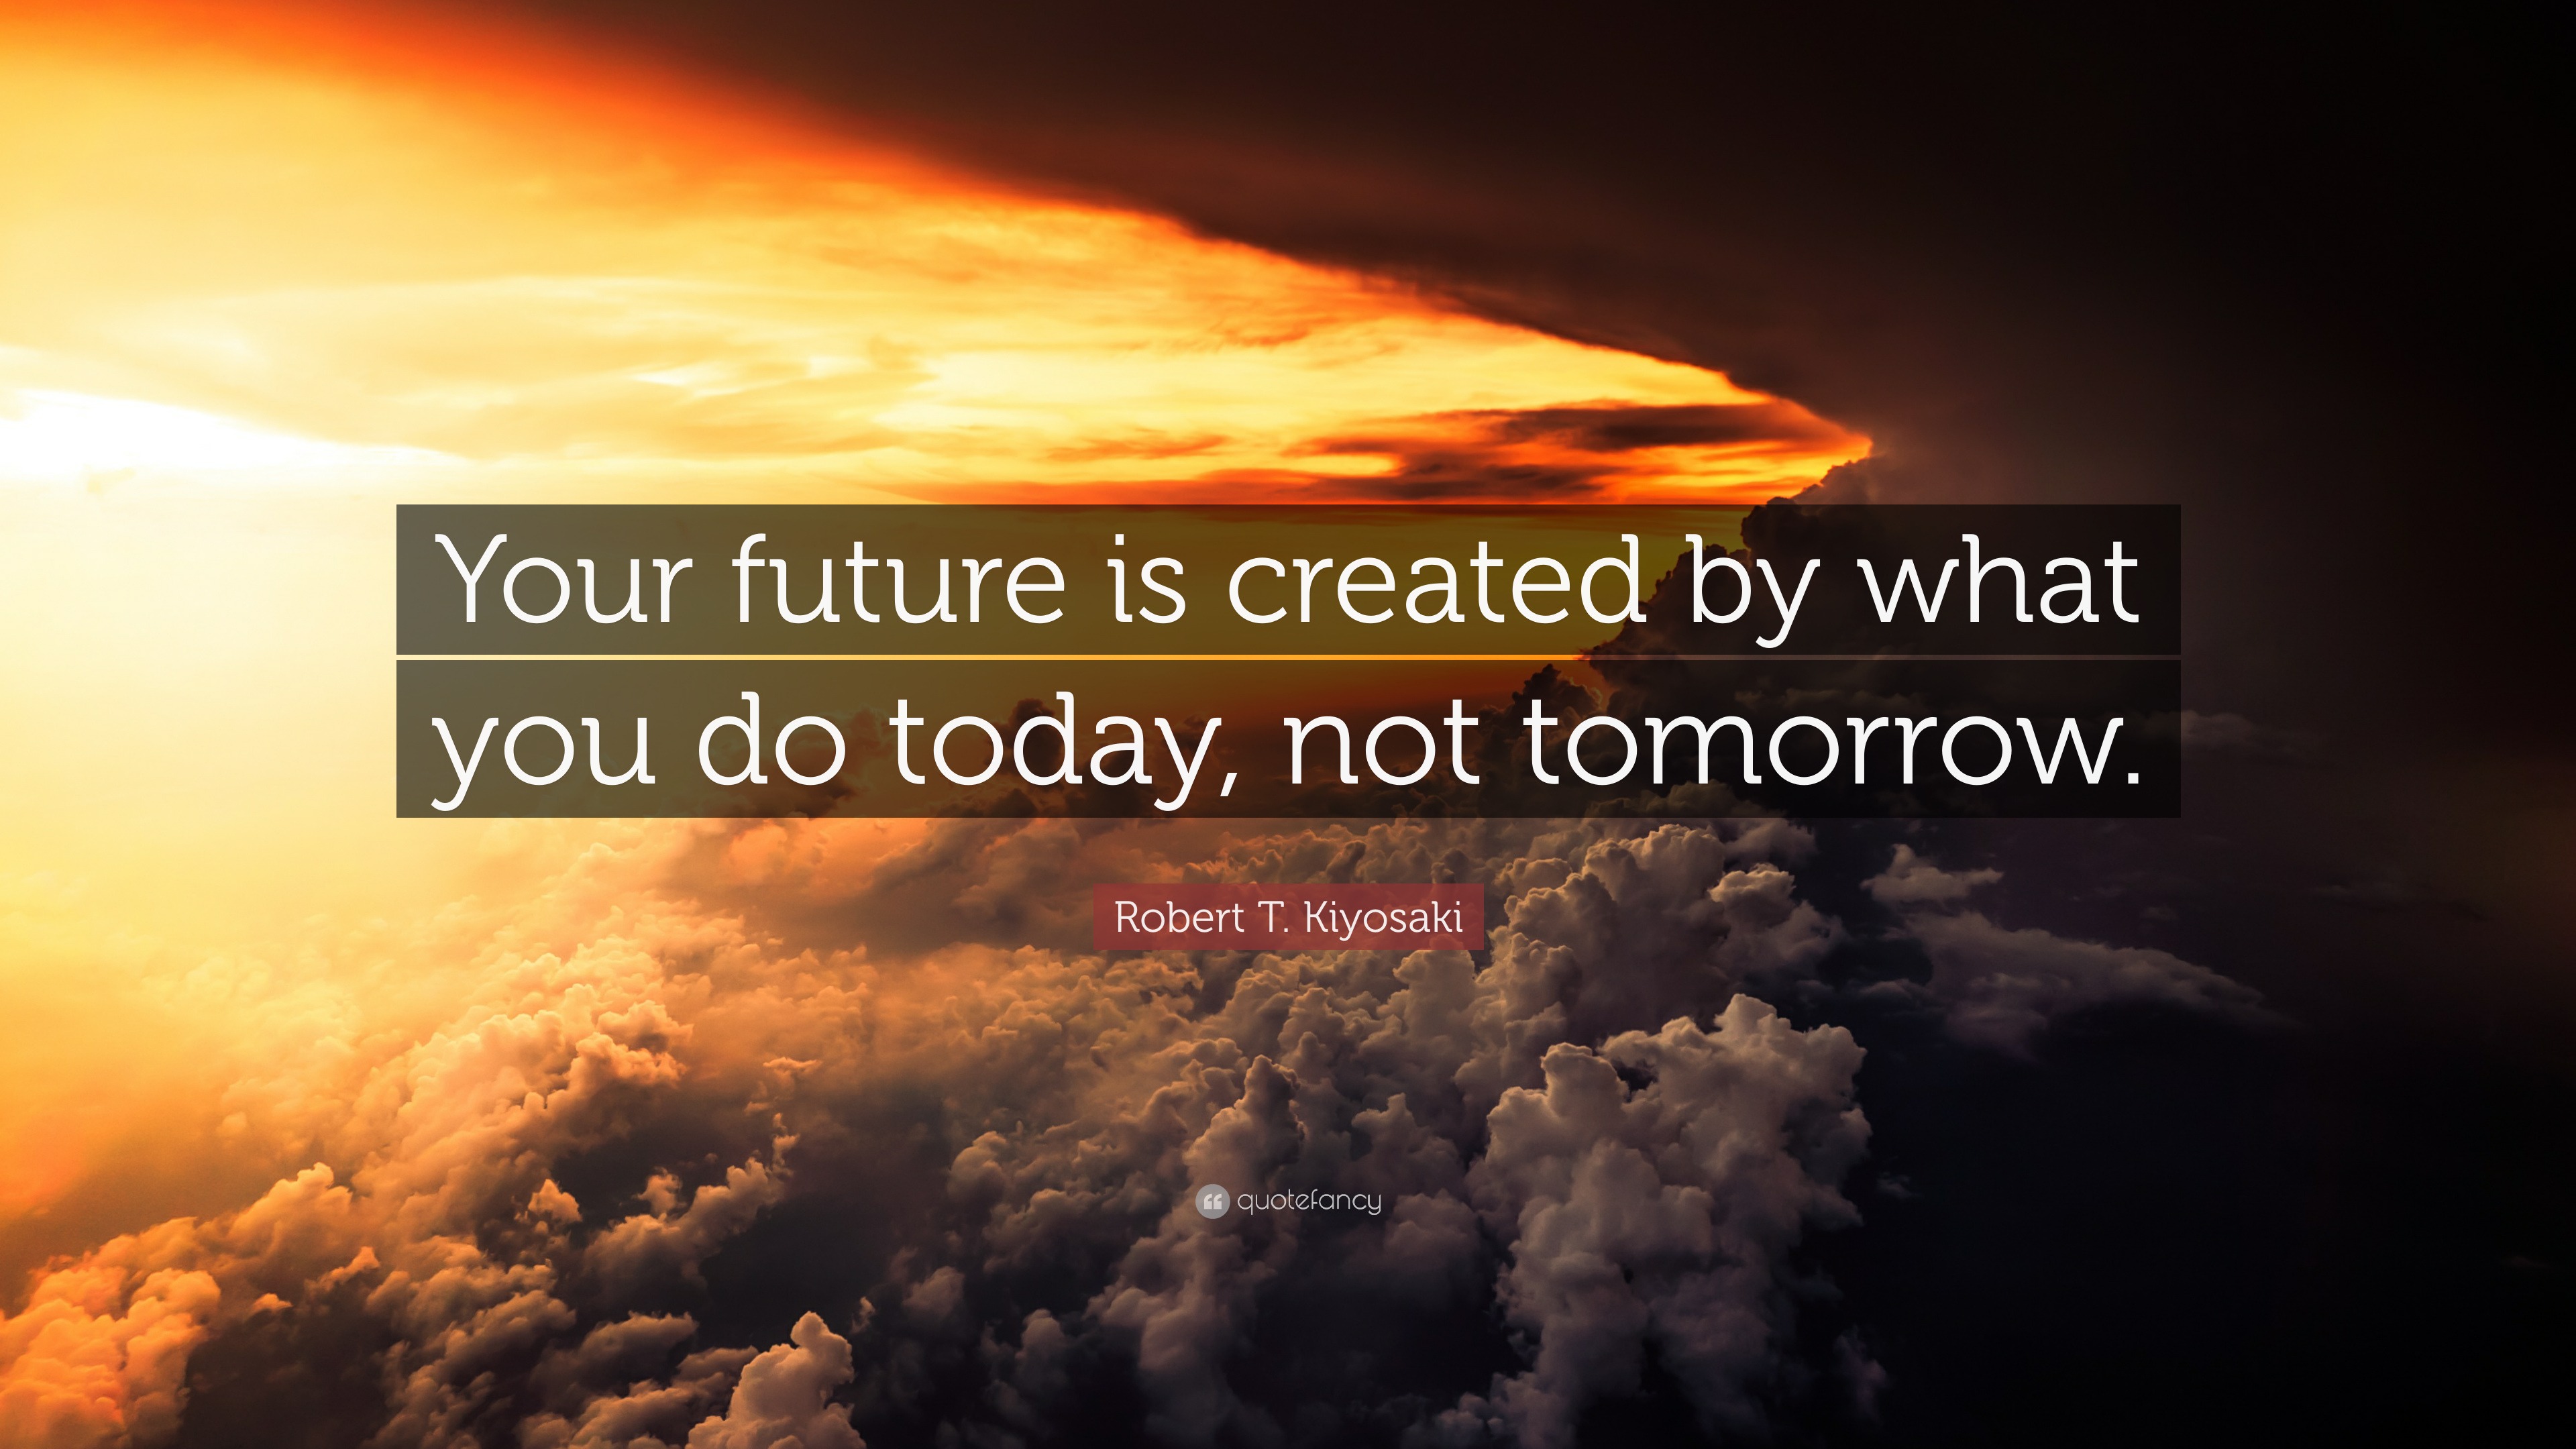 Robert T. Kiyosaki Quote: "Your future is created by what you do today ...